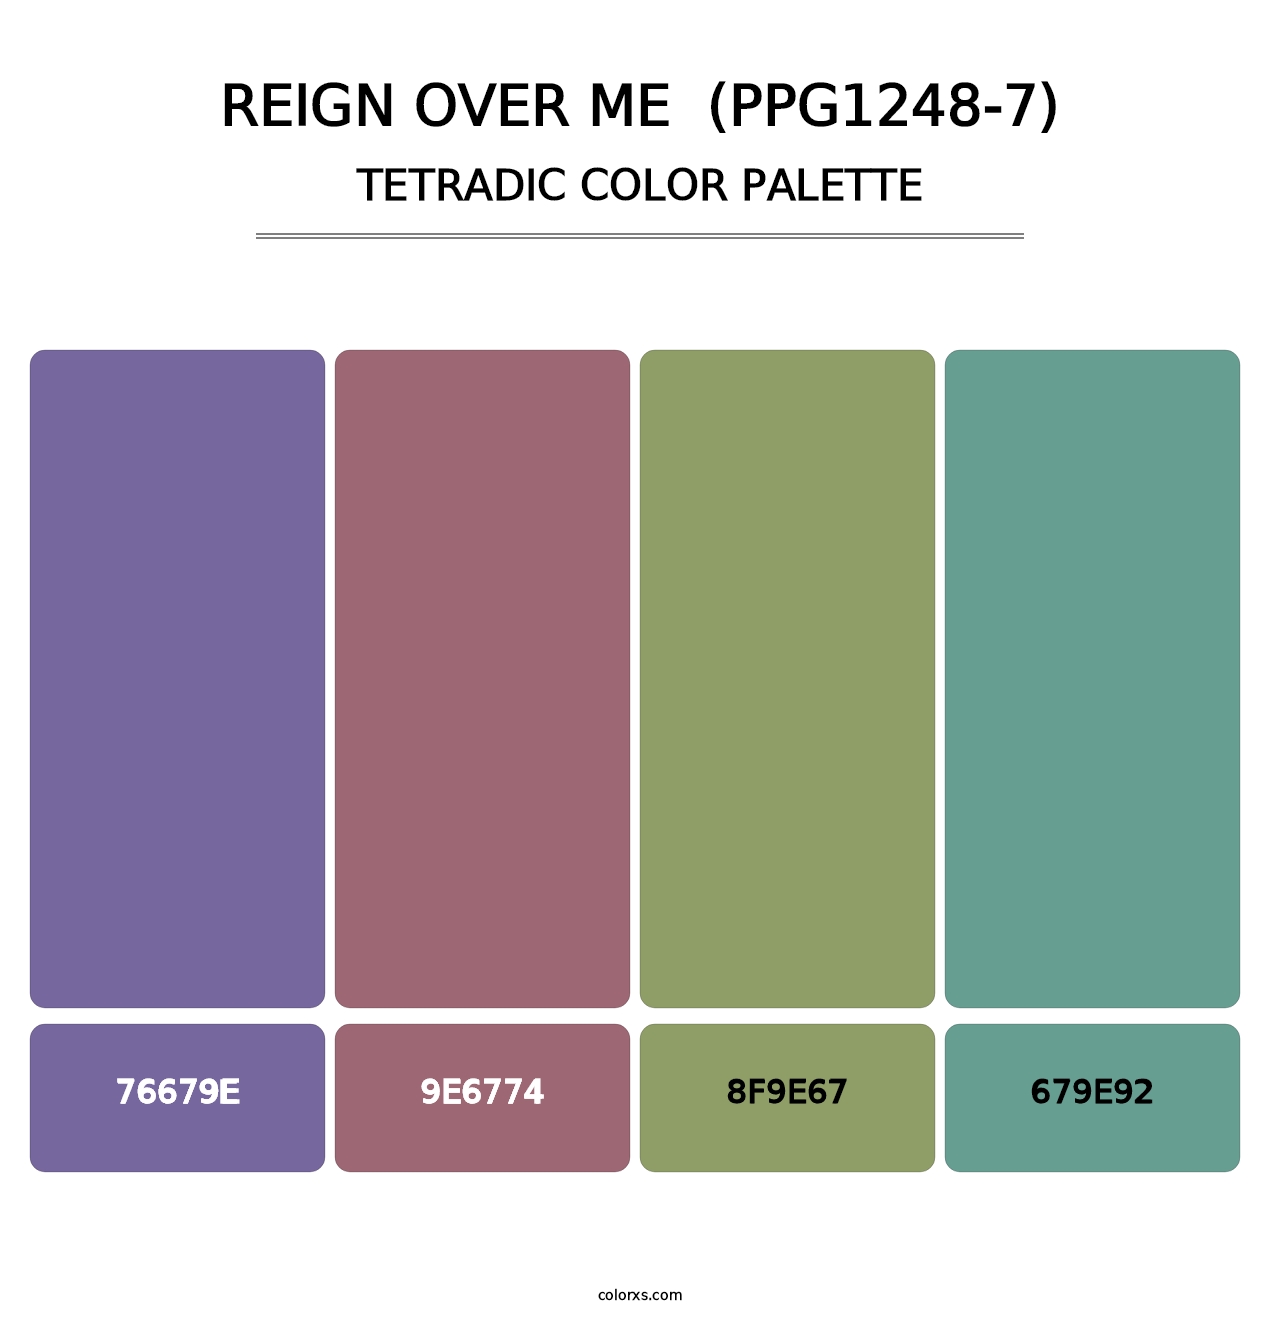 Reign Over Me  (PPG1248-7) - Tetradic Color Palette